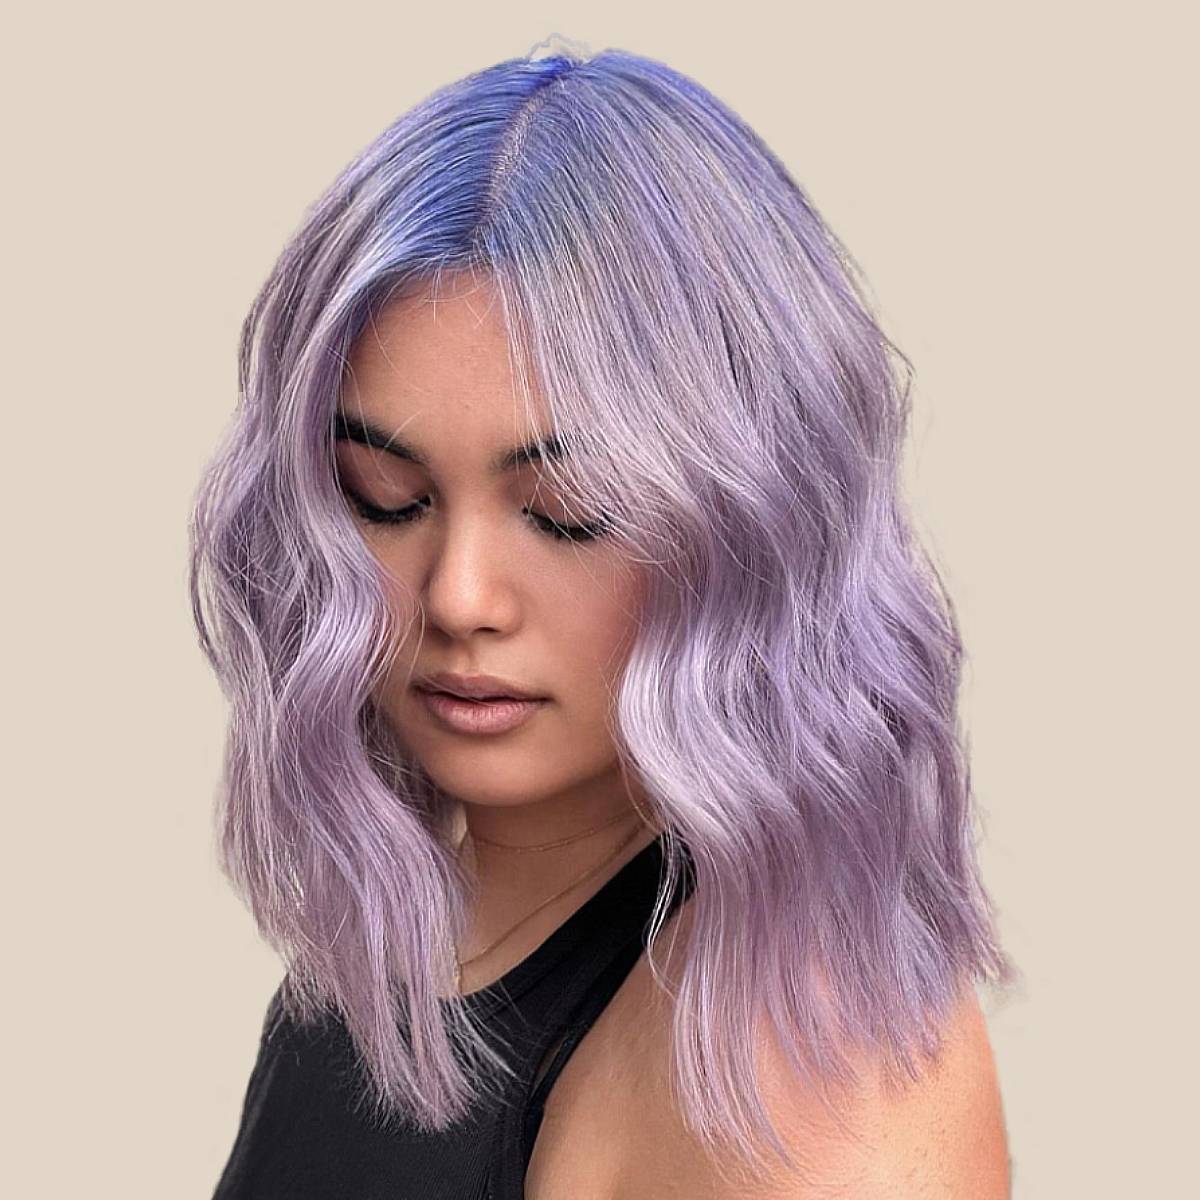 Get Creative with These Purple Hair Color Ideas for Short Hair ...